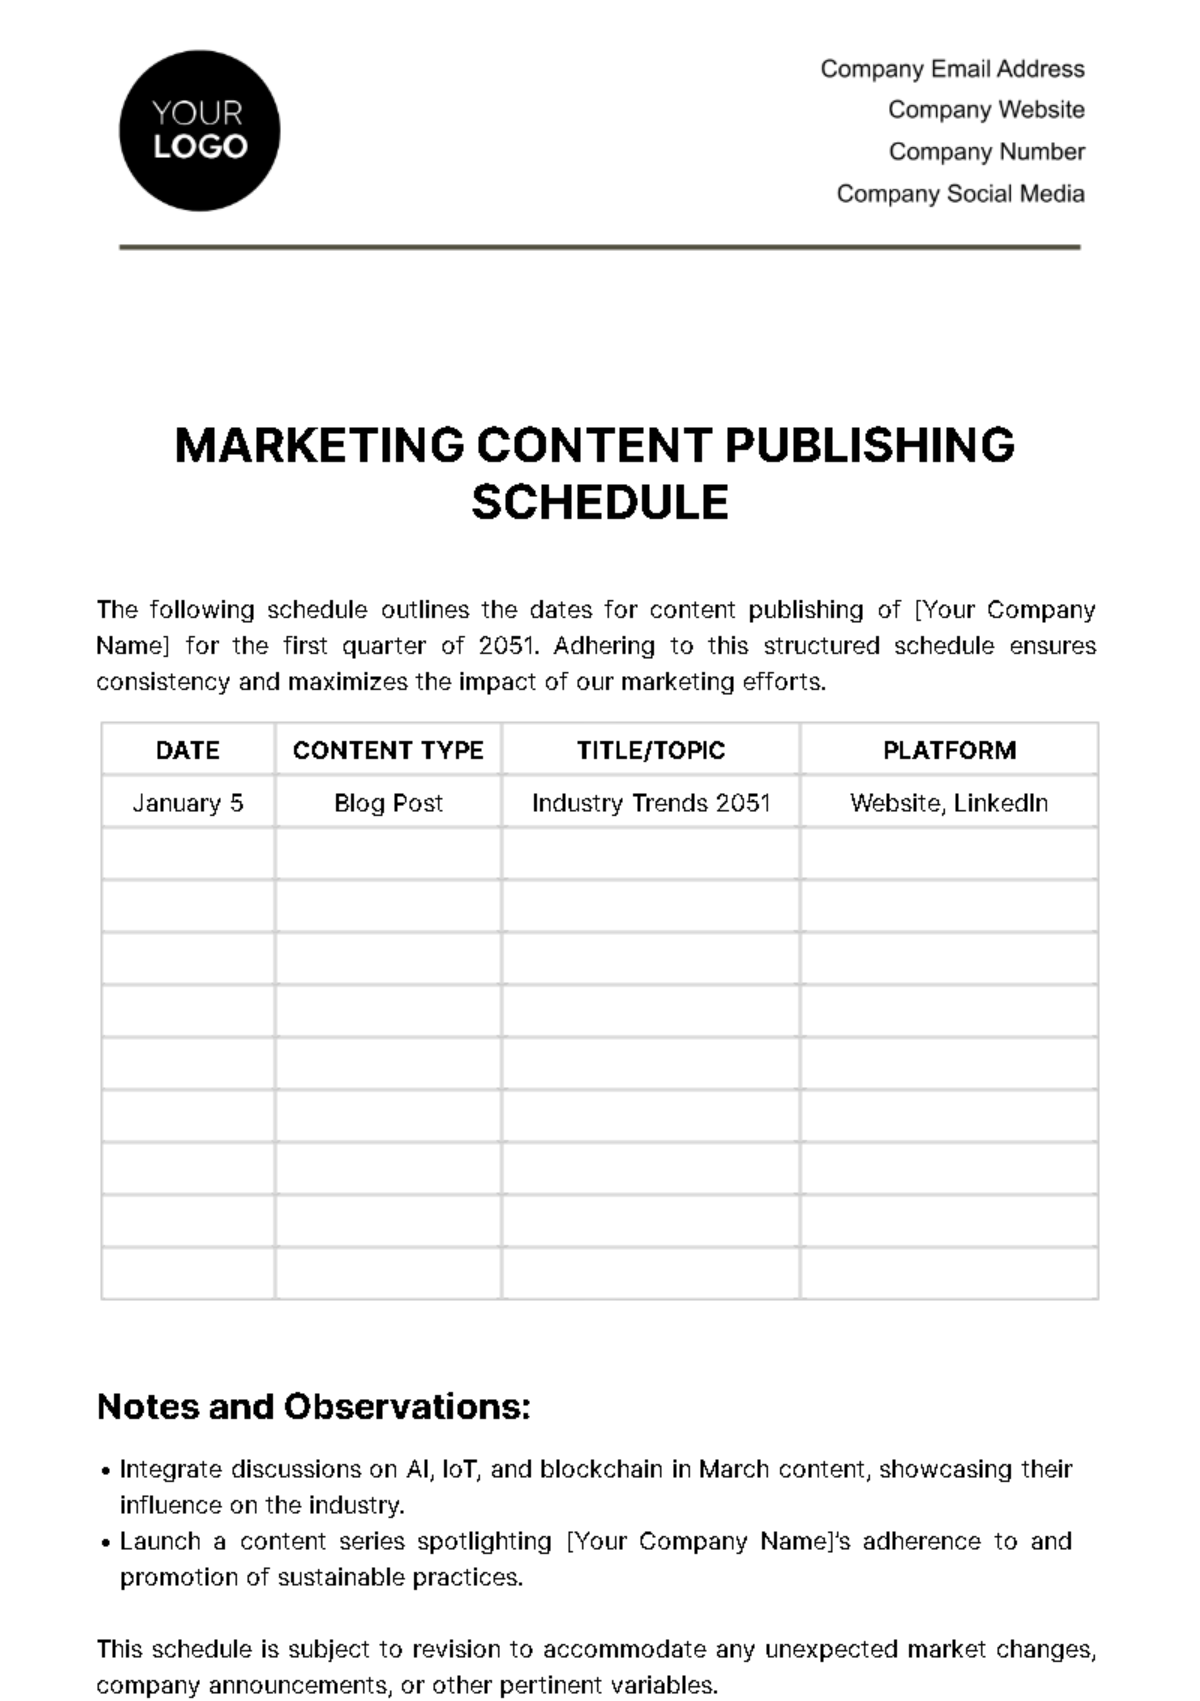 Free Marketing Content Publishing Schedule Template